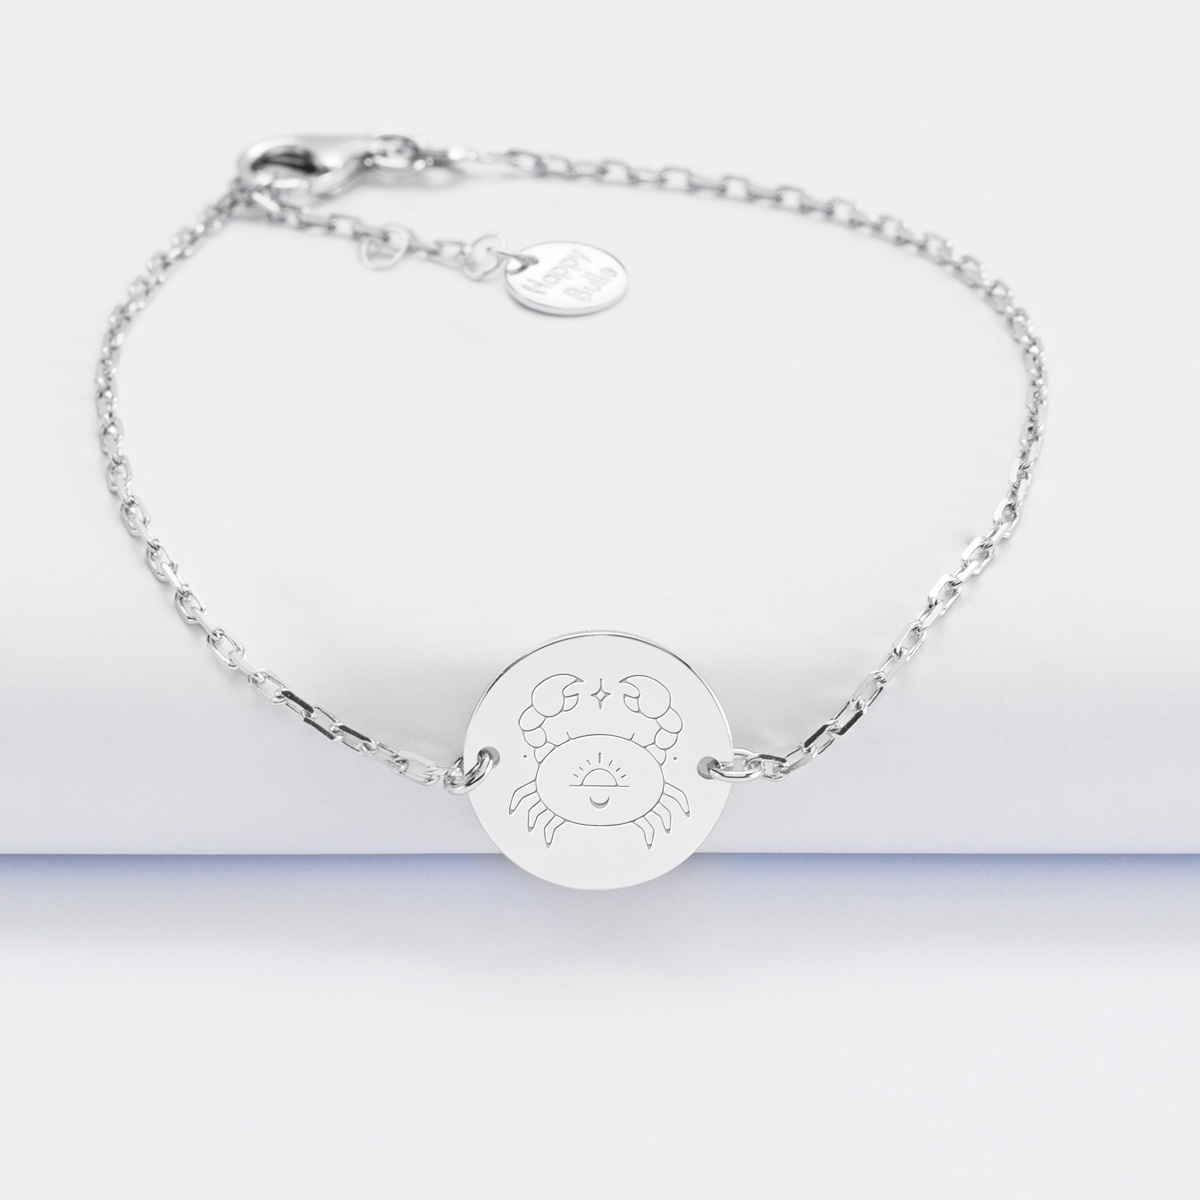 Personalised engraved 2-hole silver medallion chain bracelet 15mm – ‘Astro’ special edition